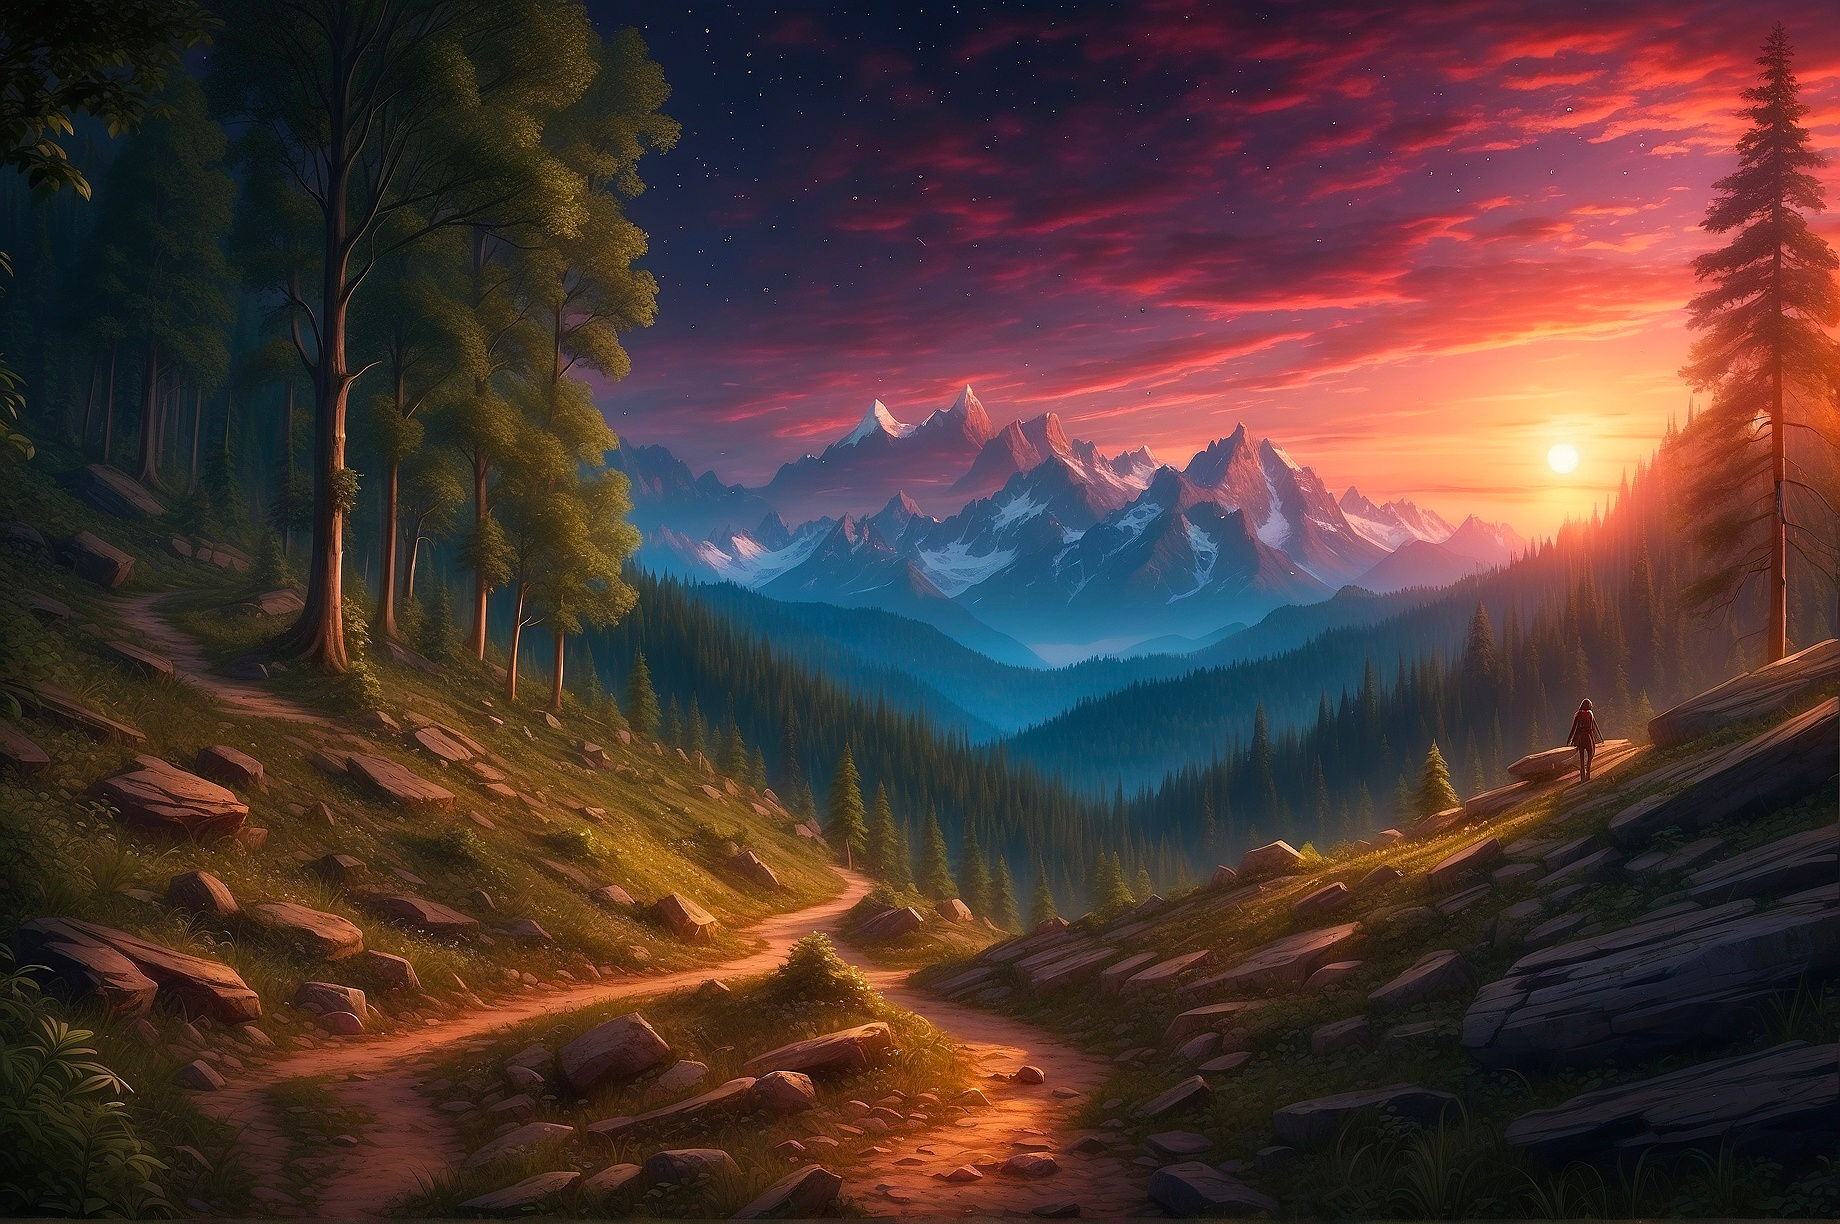 A valley with a mountain range at sunset.